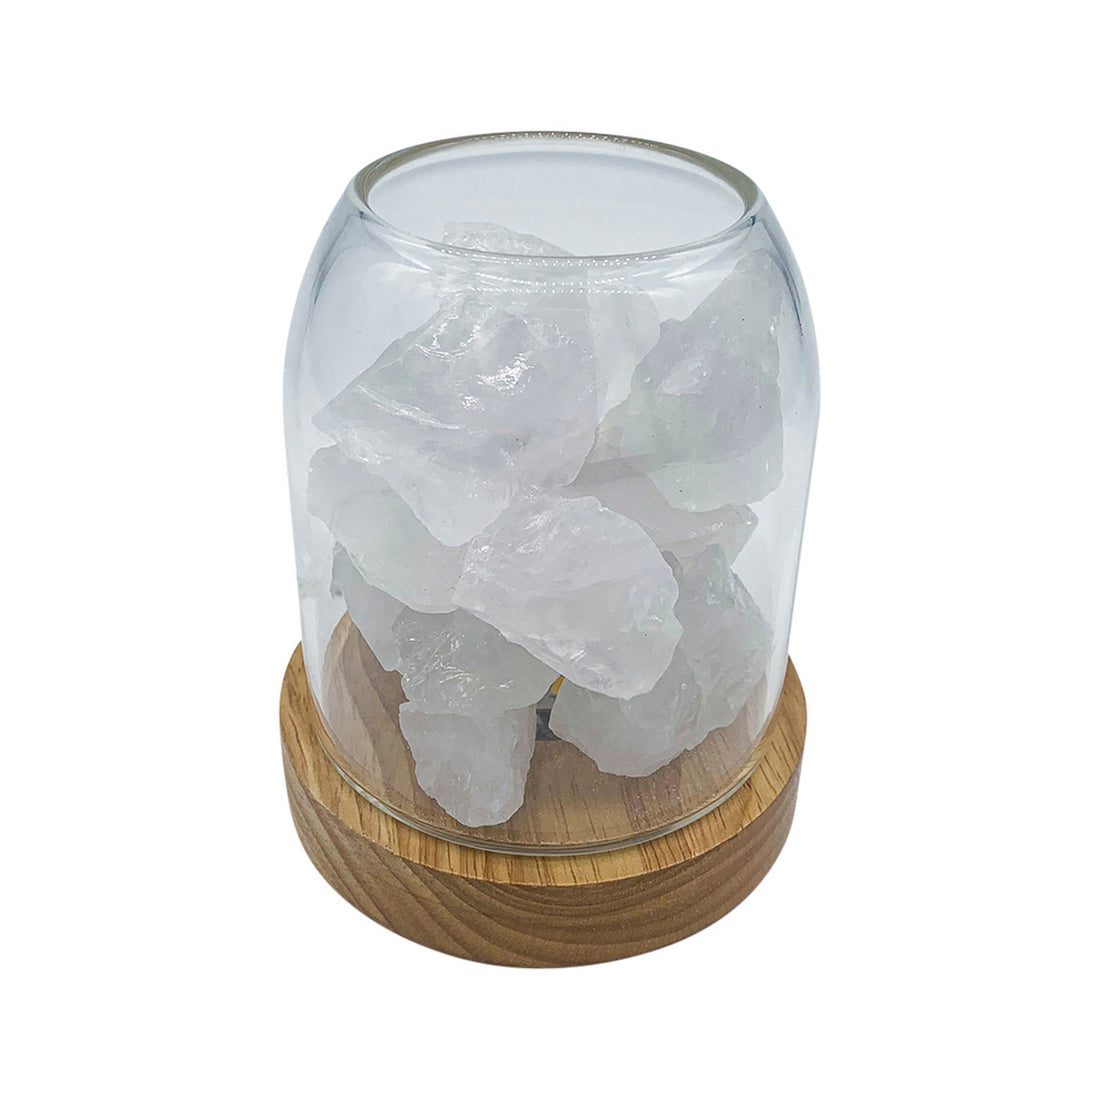 Aurora Crystal Diffuser Wooden Base with Light Clear Quartz